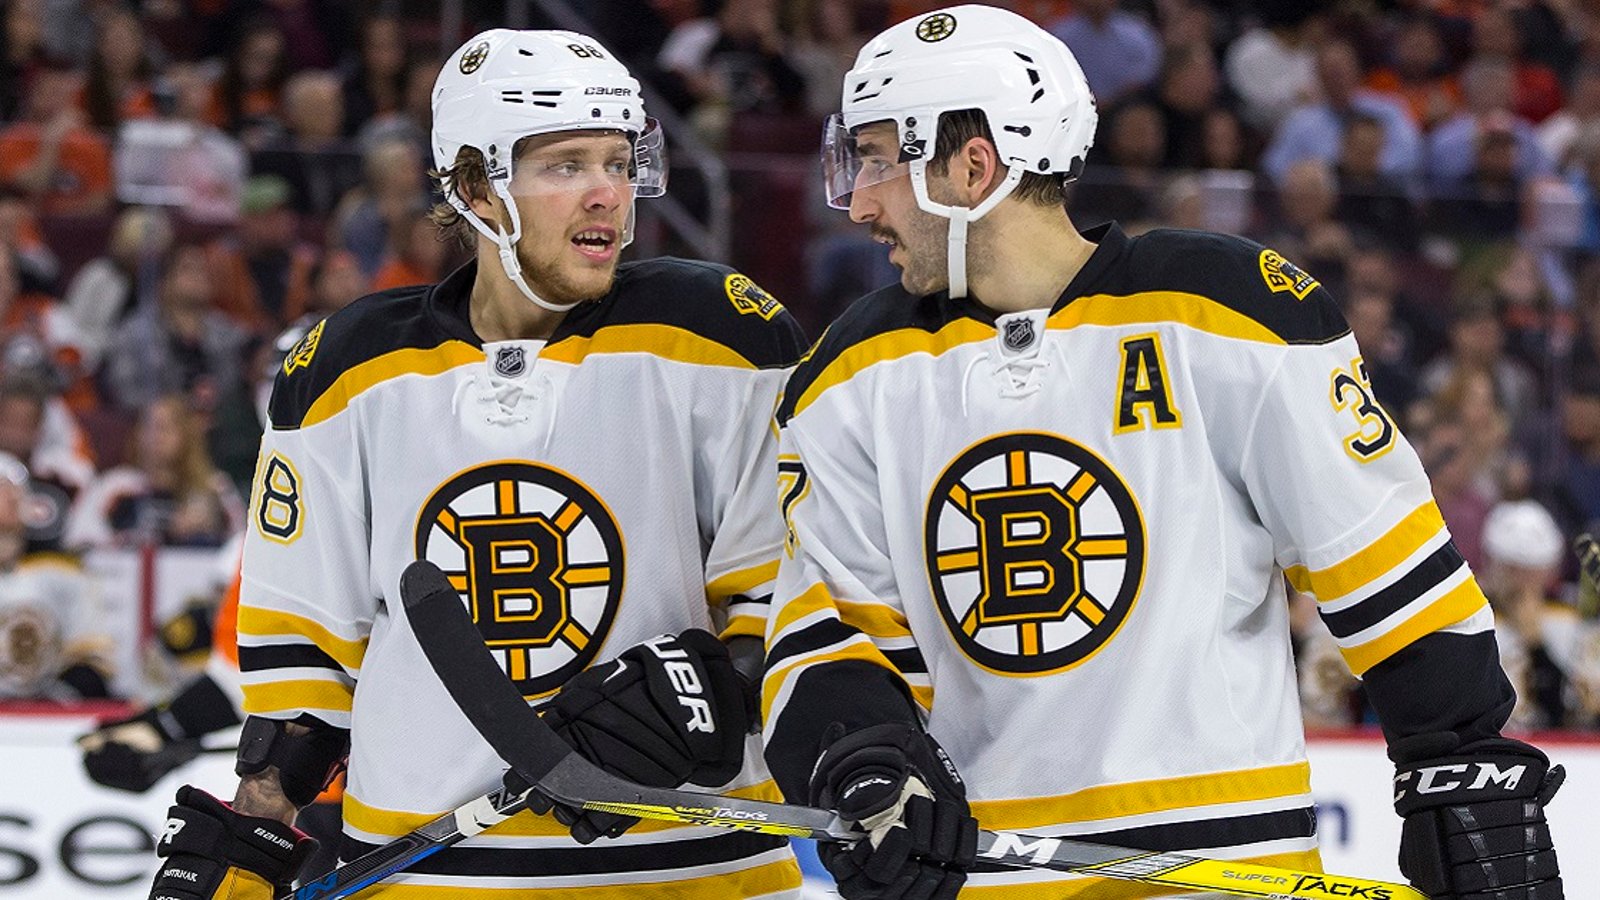 Breaking: Bruins superstar out again with mystery injury. 